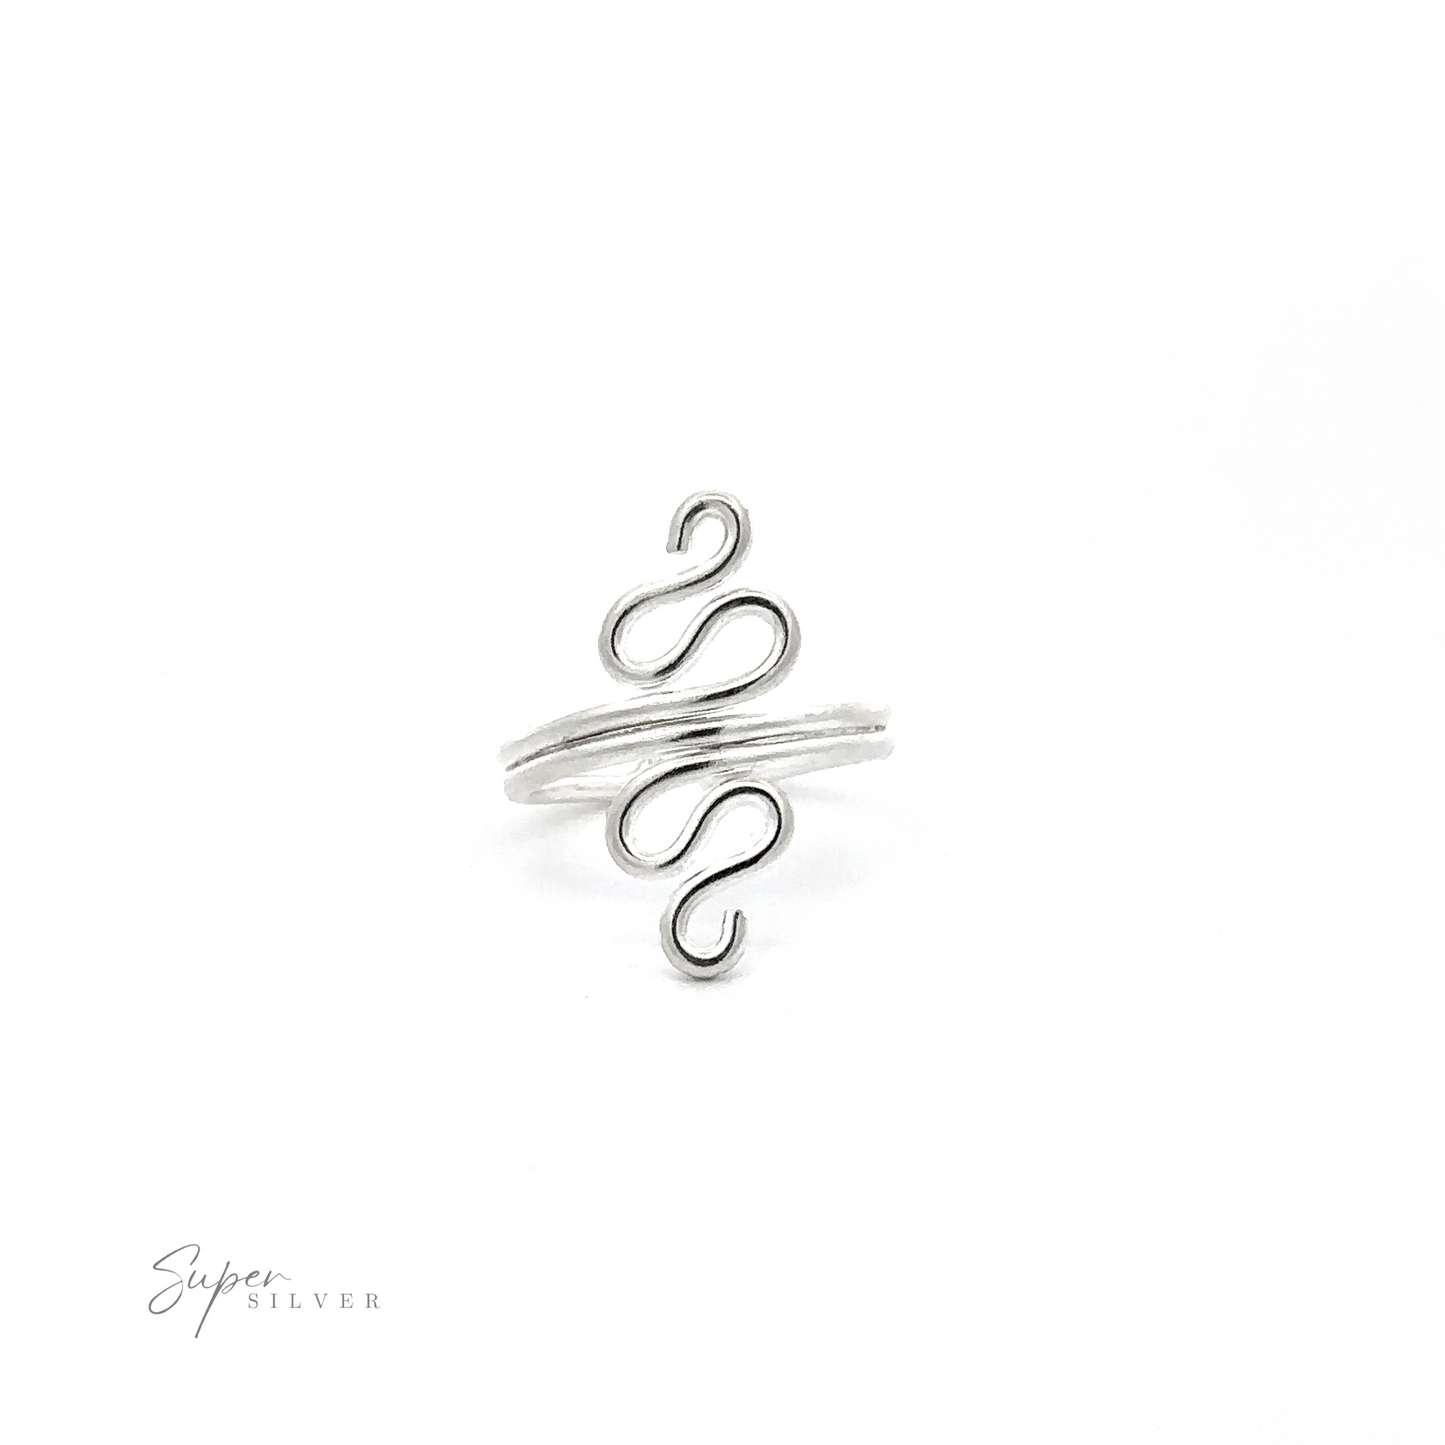 A Squiggly Adjustable Toe Ring displayed against a white background.